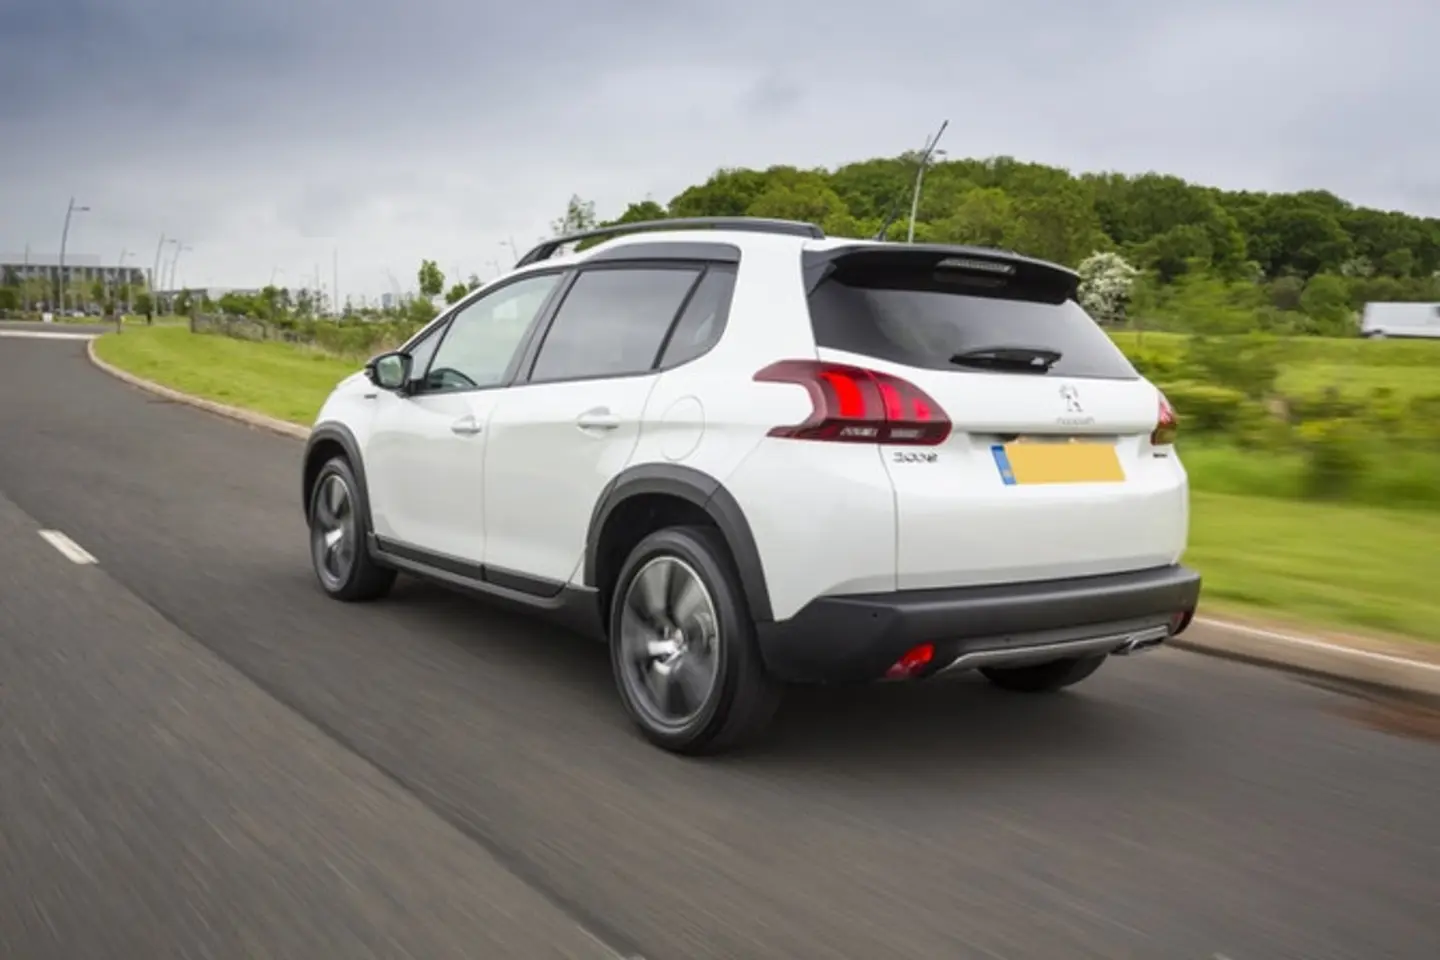 The rear exterior of a white Peugeot 2008